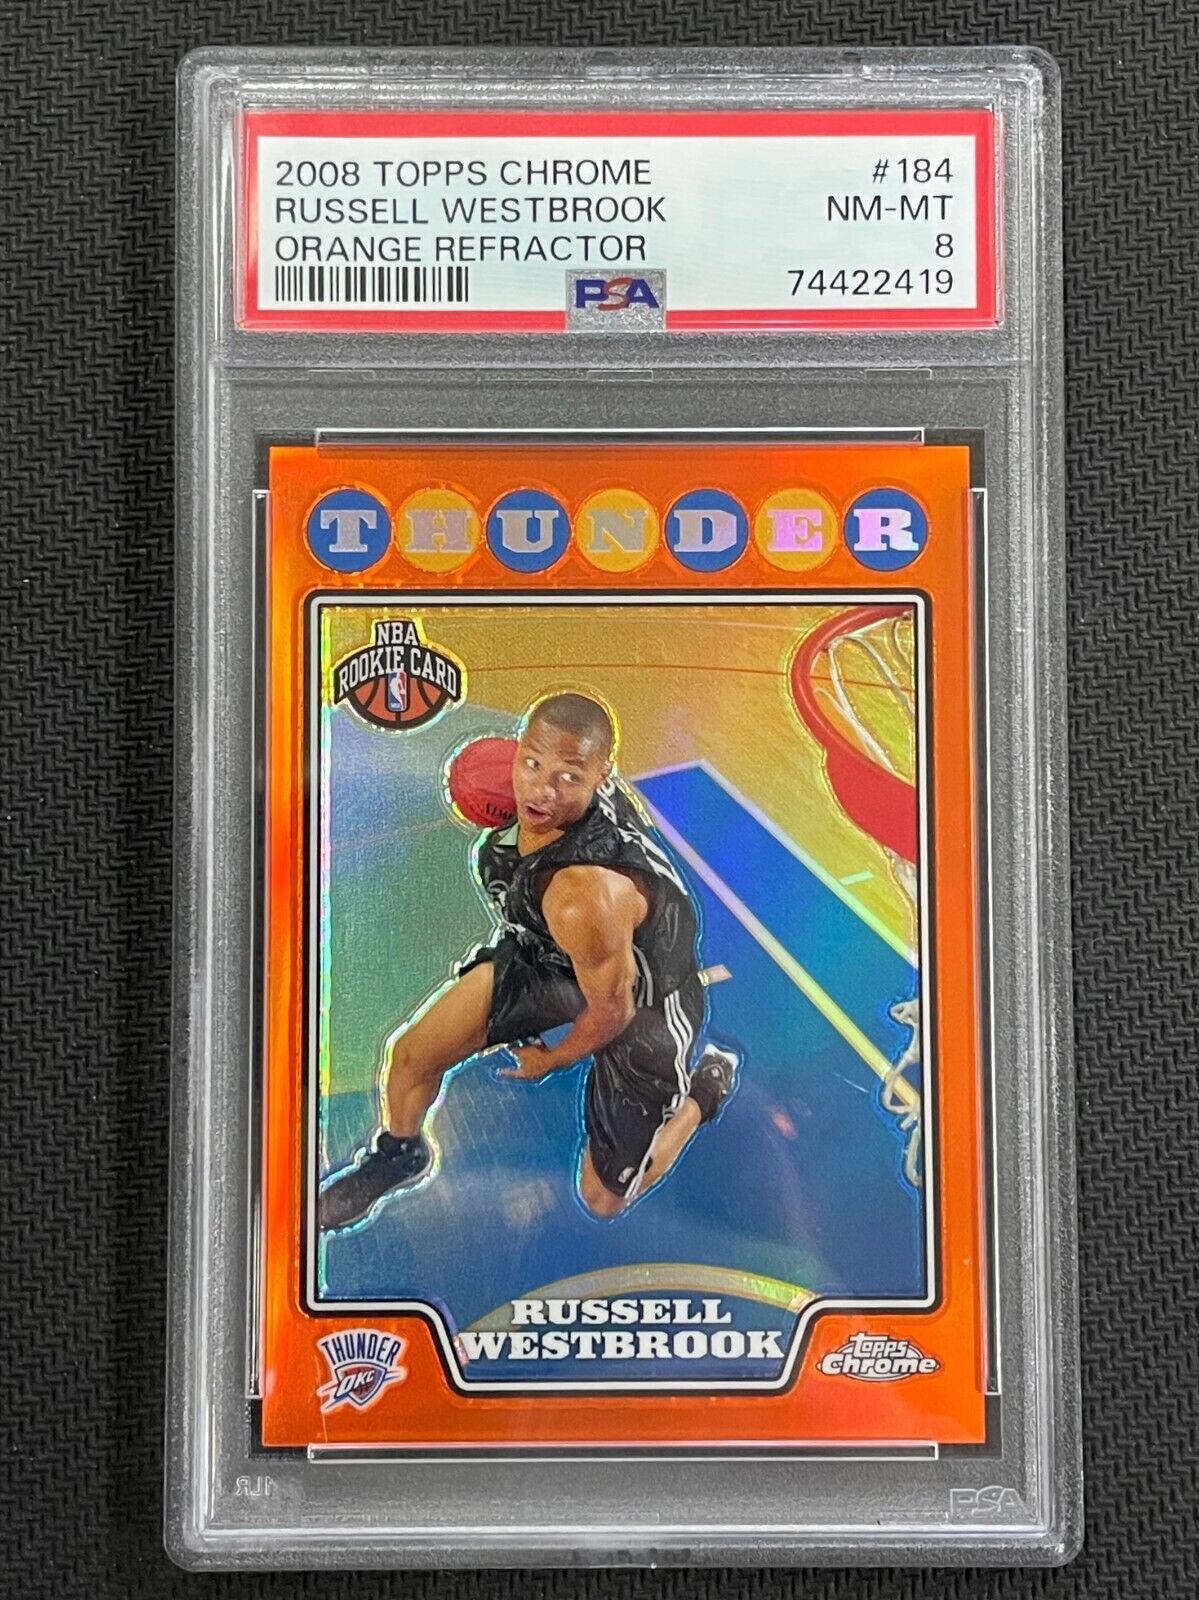 2008 Topps Chrome Russell Westbrook #184 Orange Refractor RC #'d/499 PSA 8 NM-MT